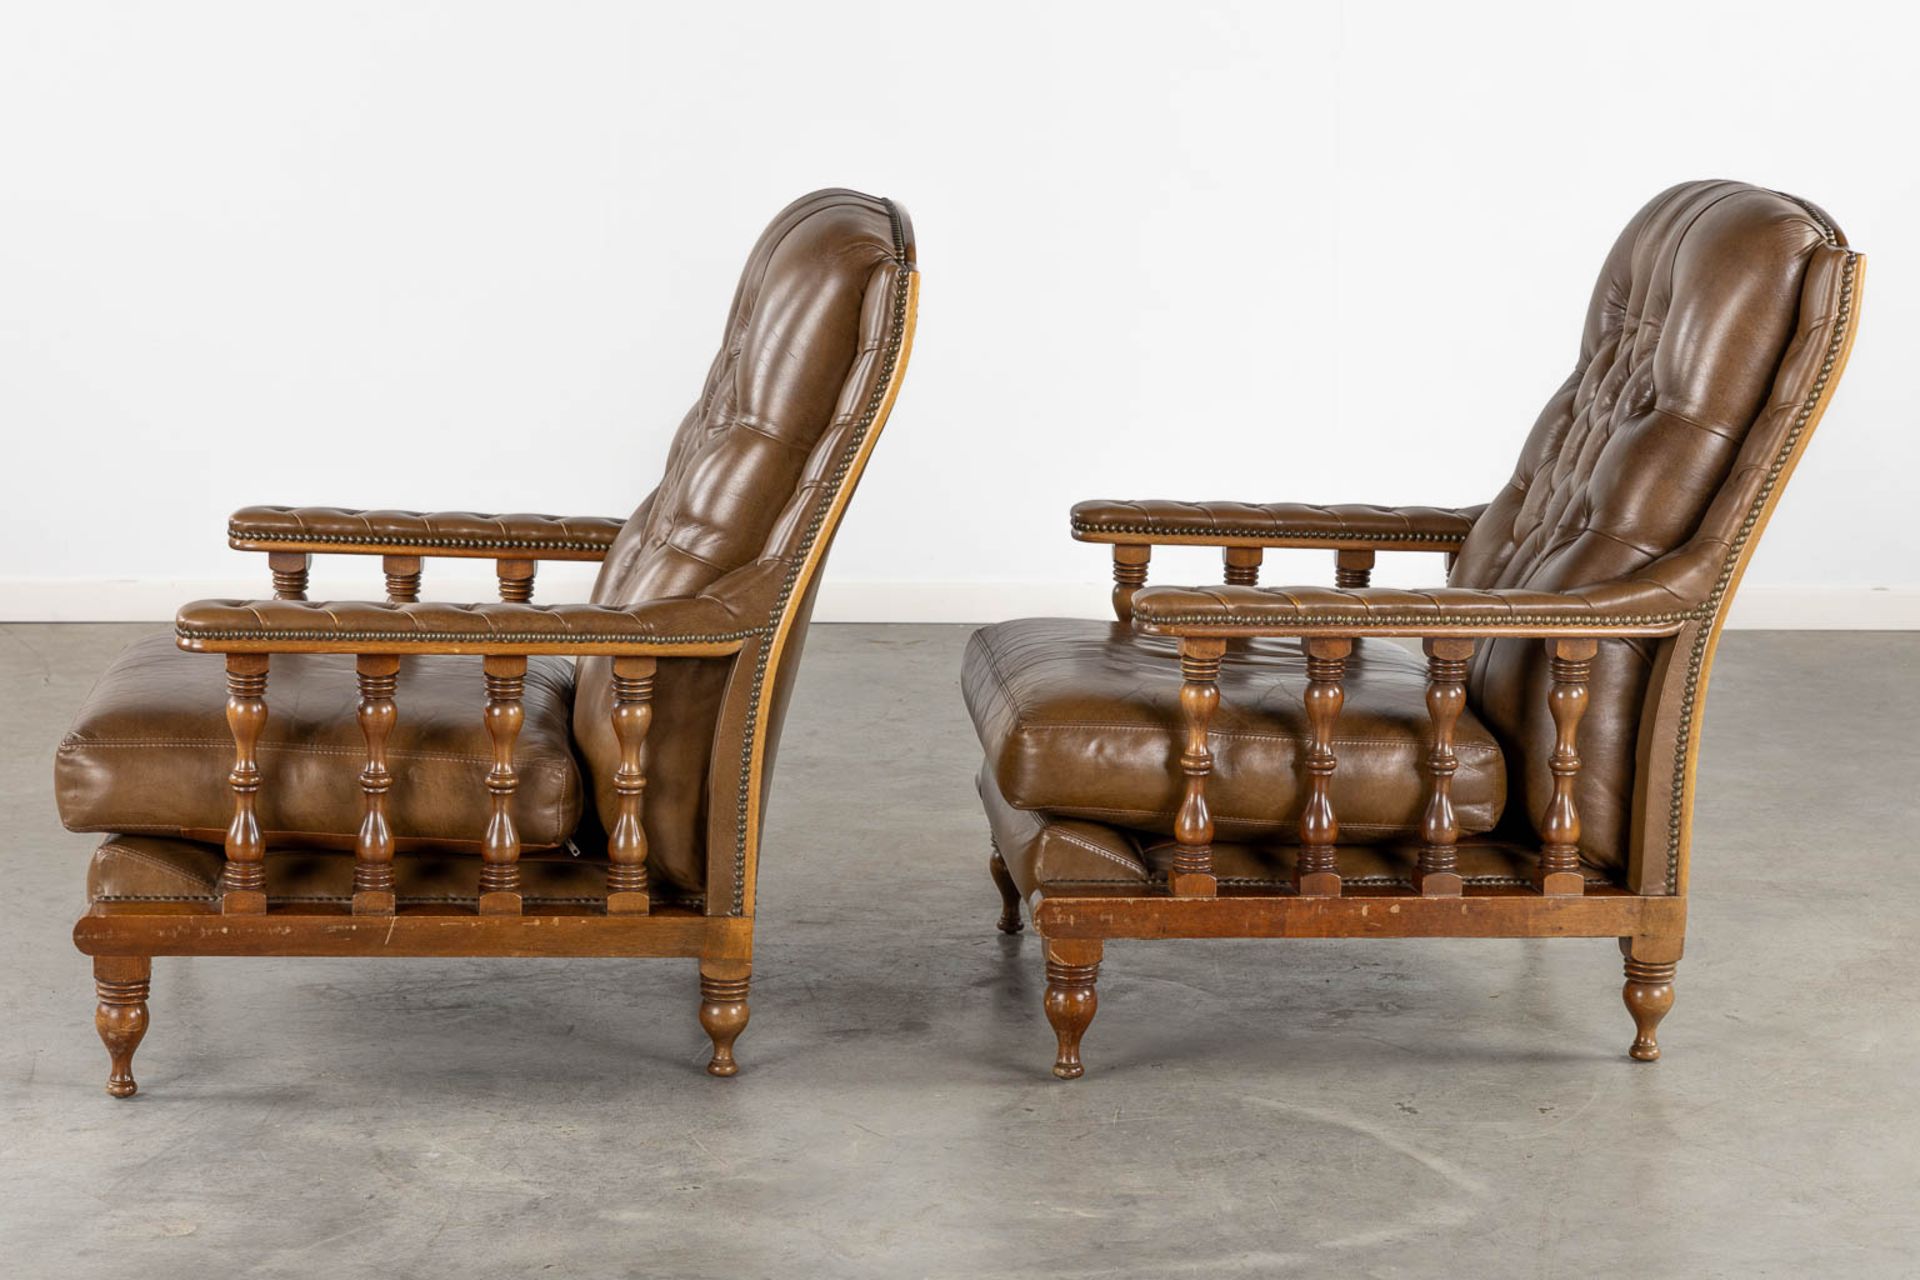 A pair of relax chairs, leather and wood in Chesterfield style. (L:83 x W:74 x H:95 cm) - Bild 4 aus 11